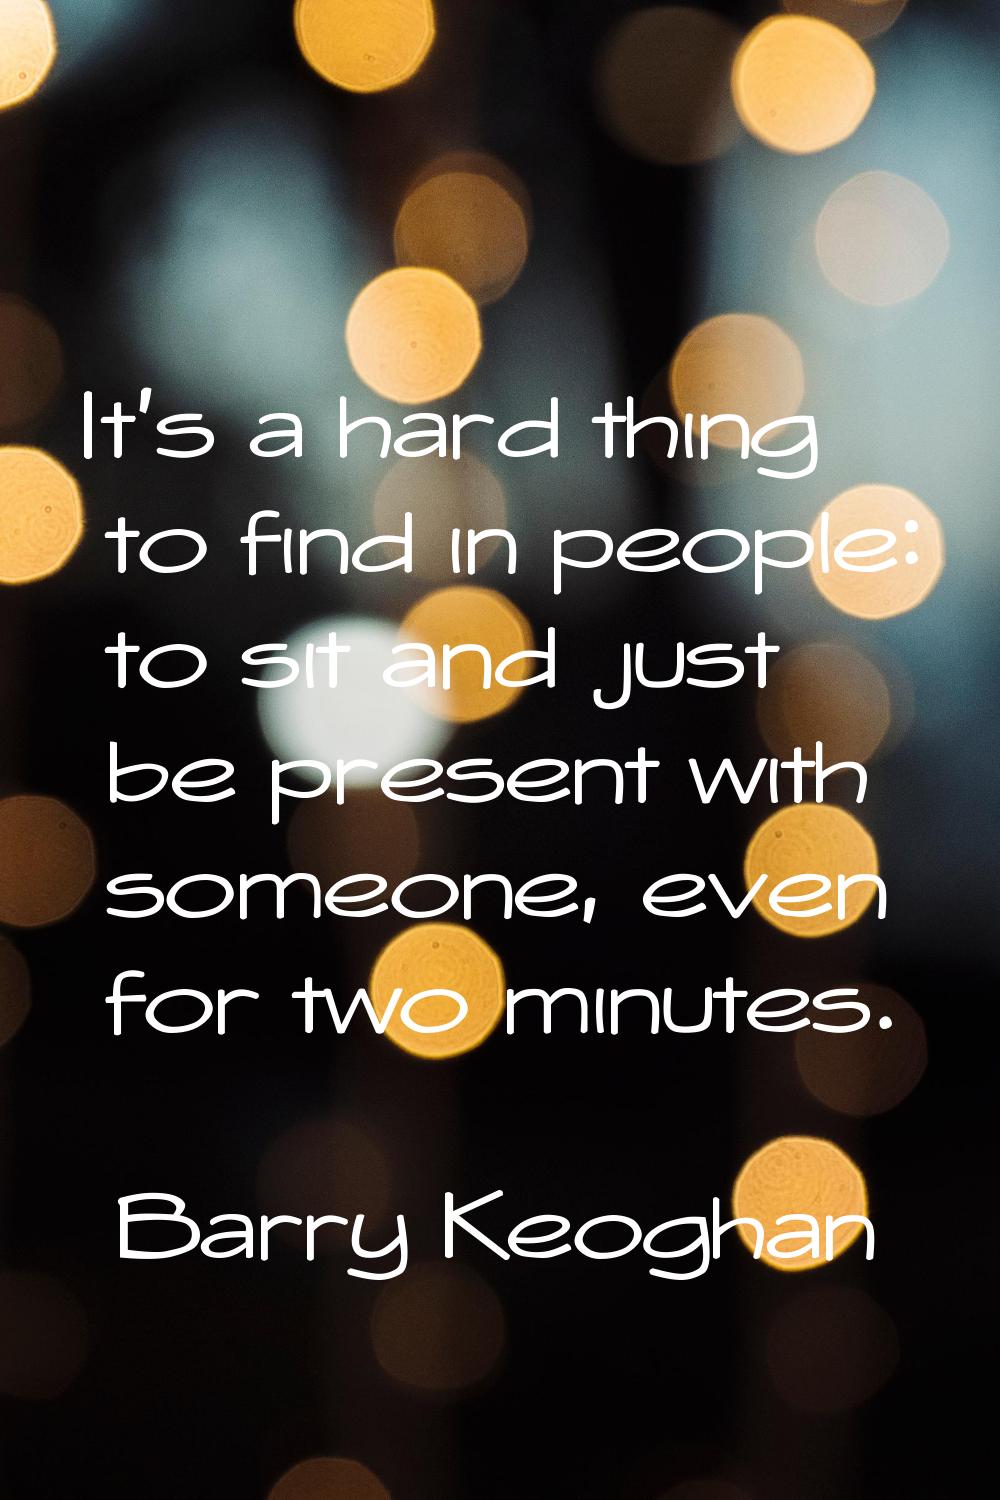 It's a hard thing to find in people: to sit and just be present with someone, even for two minutes.